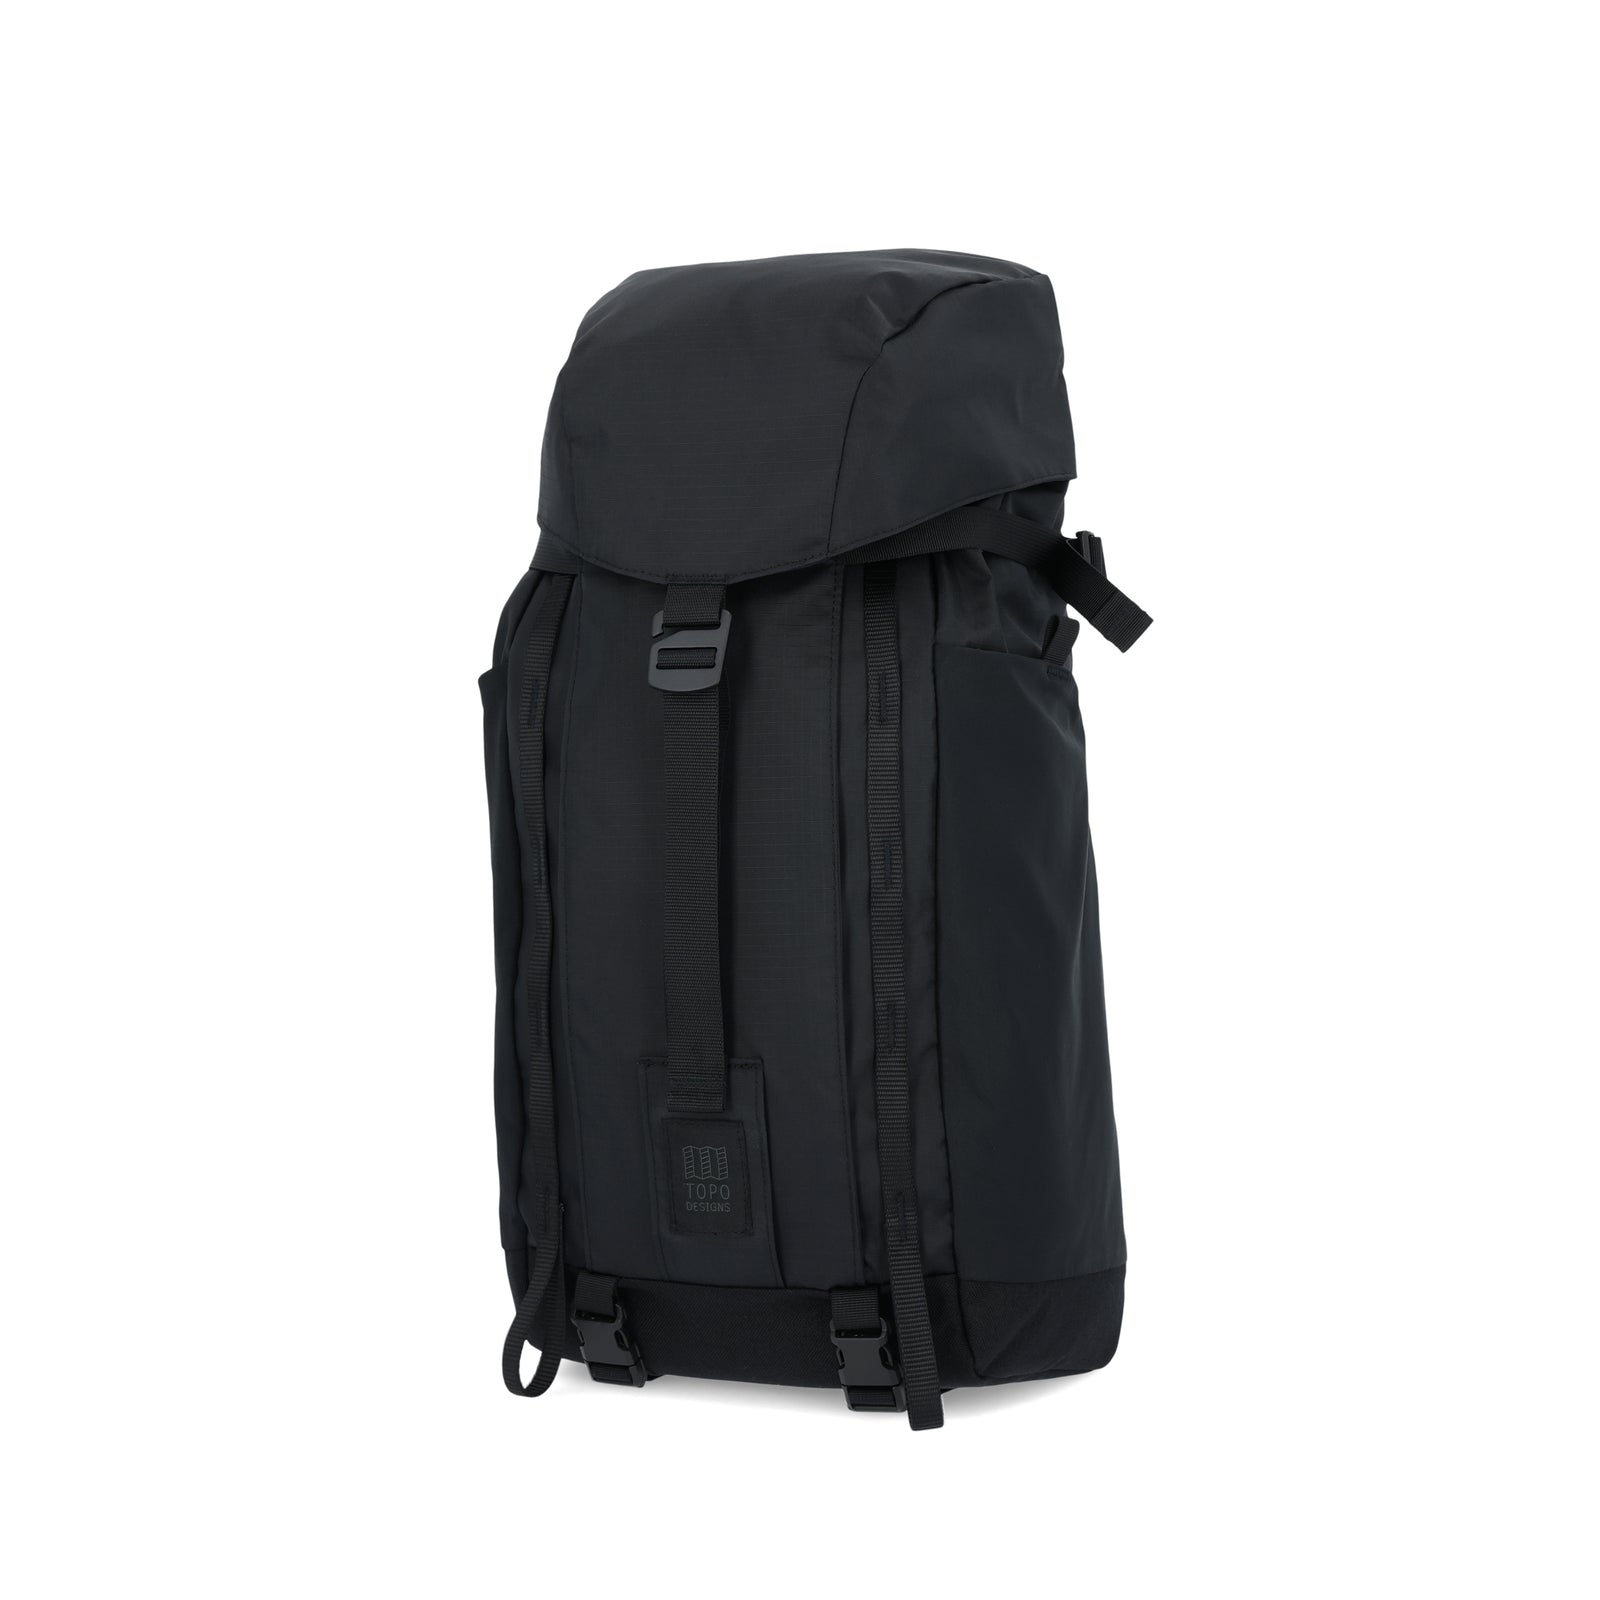 Topo Designs Mountain Pack 16L hiking backpack with internal laptop sleeve in lightweight recycled nylon "Black".